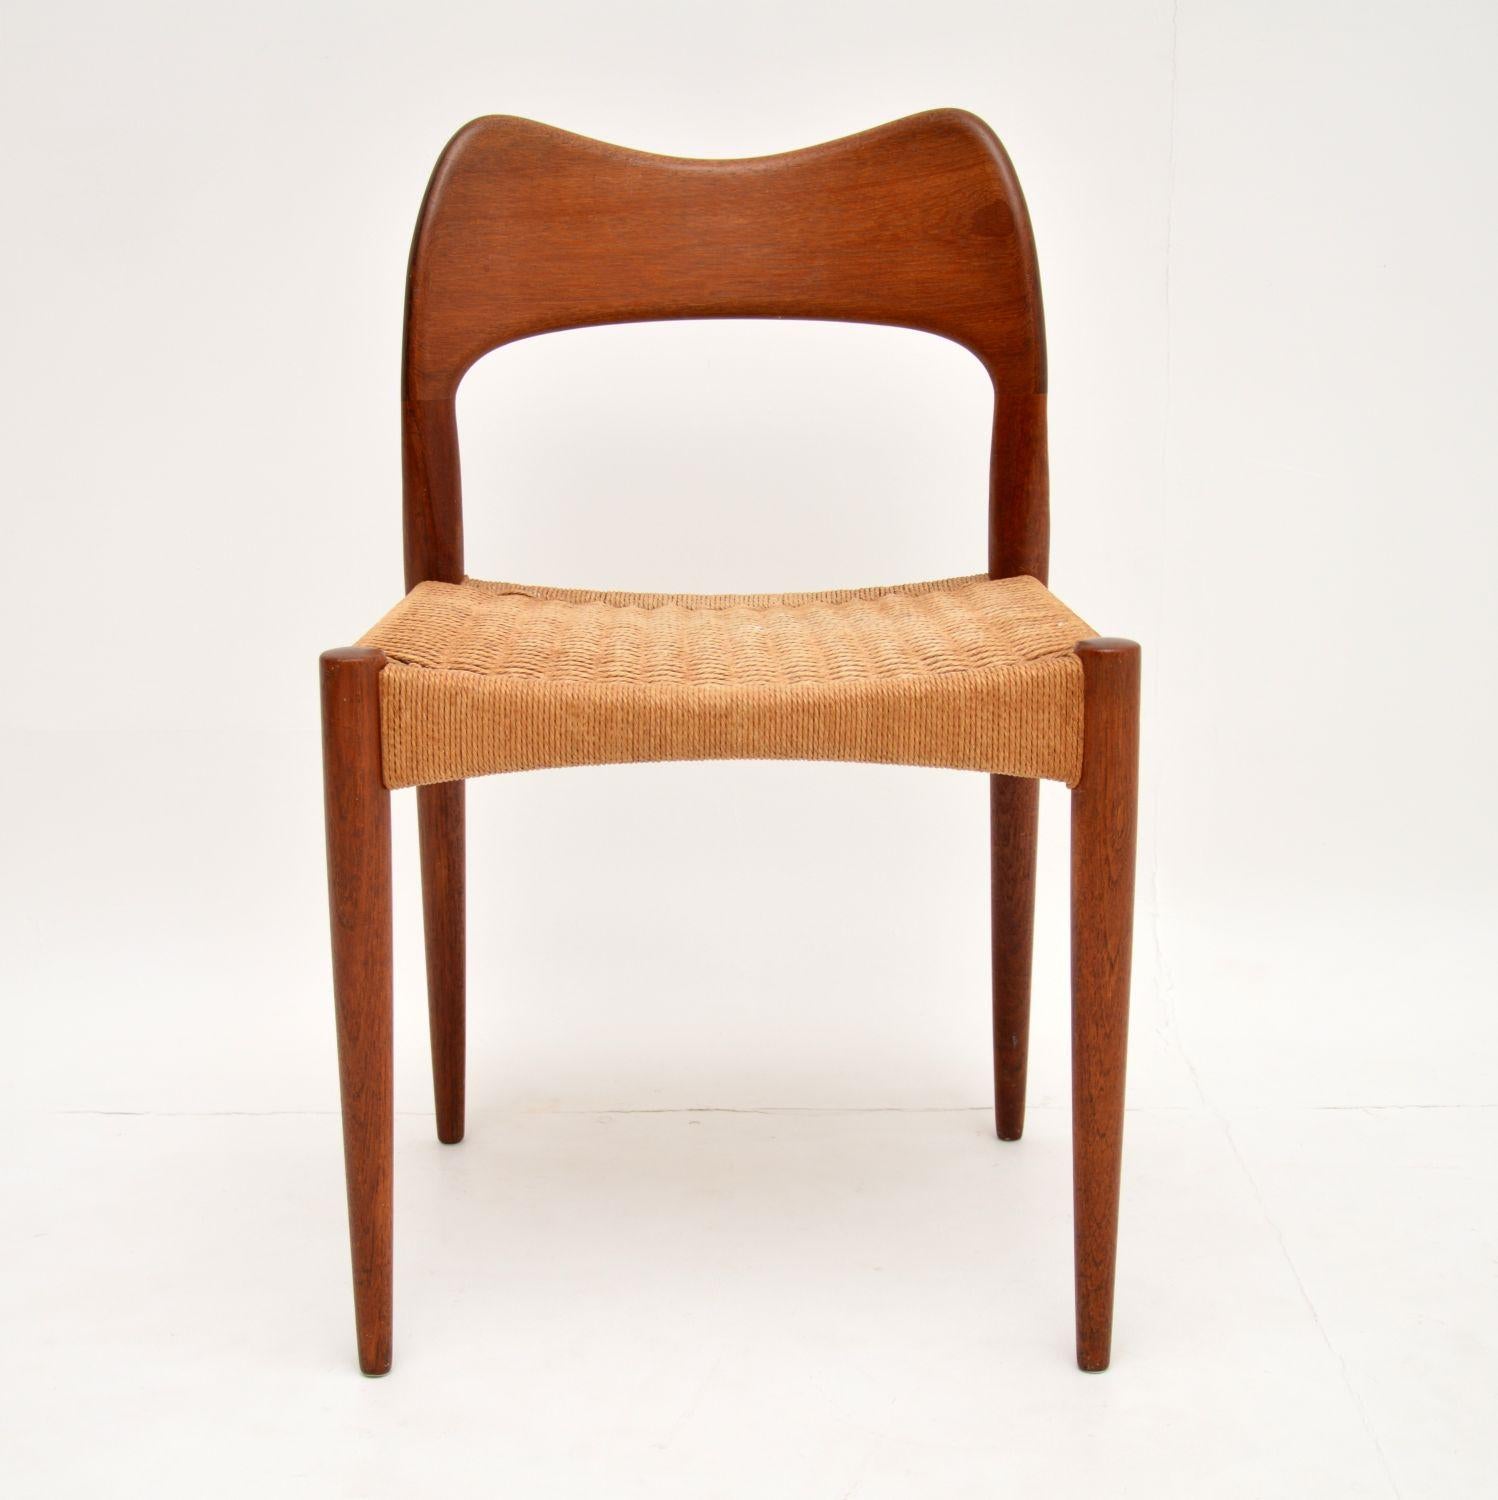 A stunning and rare vintage Danish chair, this dates from the 1960s. It was designed by Arne Hovmand-Olsen, and made by Mogens Kold in the 1960s. The original badge is seen under the seat.

This single dining chair would be a great corner or side